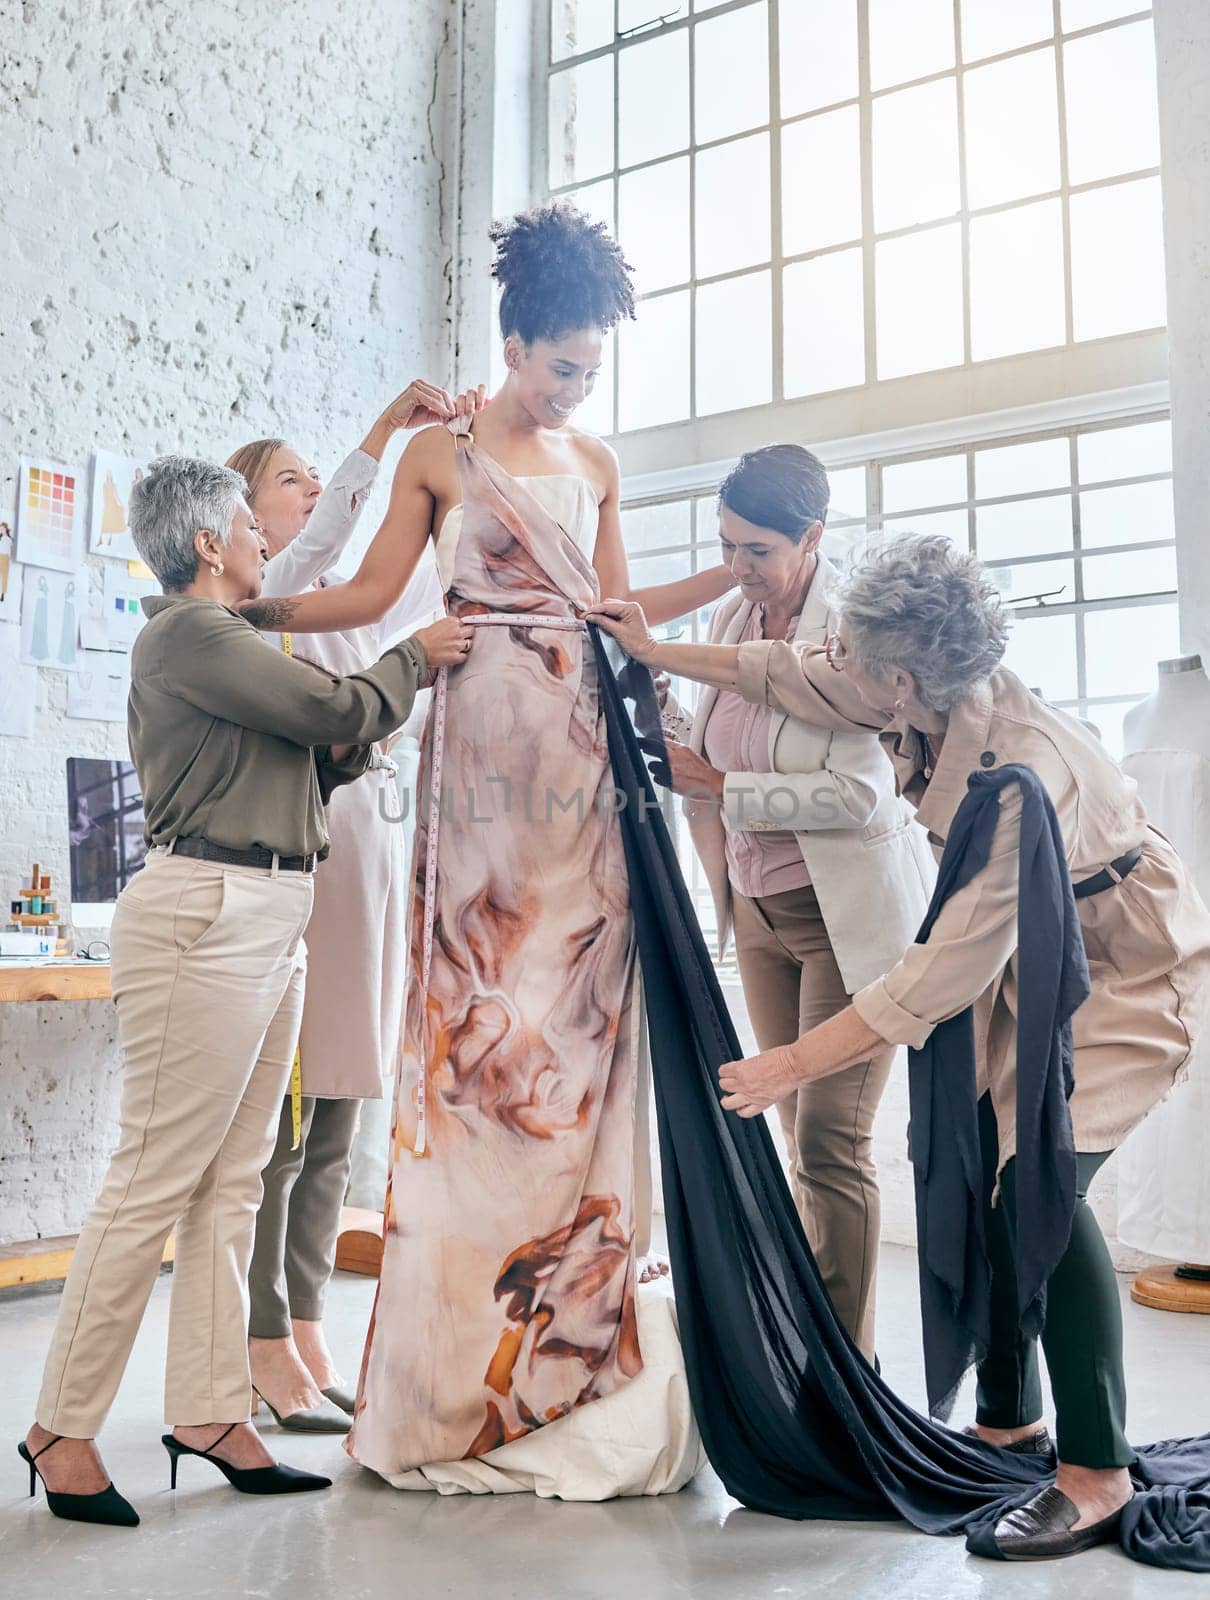 Designer women, help model and fitting dress, design and teamwork for runway fashion vision in workshop. Happy creative team, woman collaboration and test fabric with diversity, goals or helping hand.